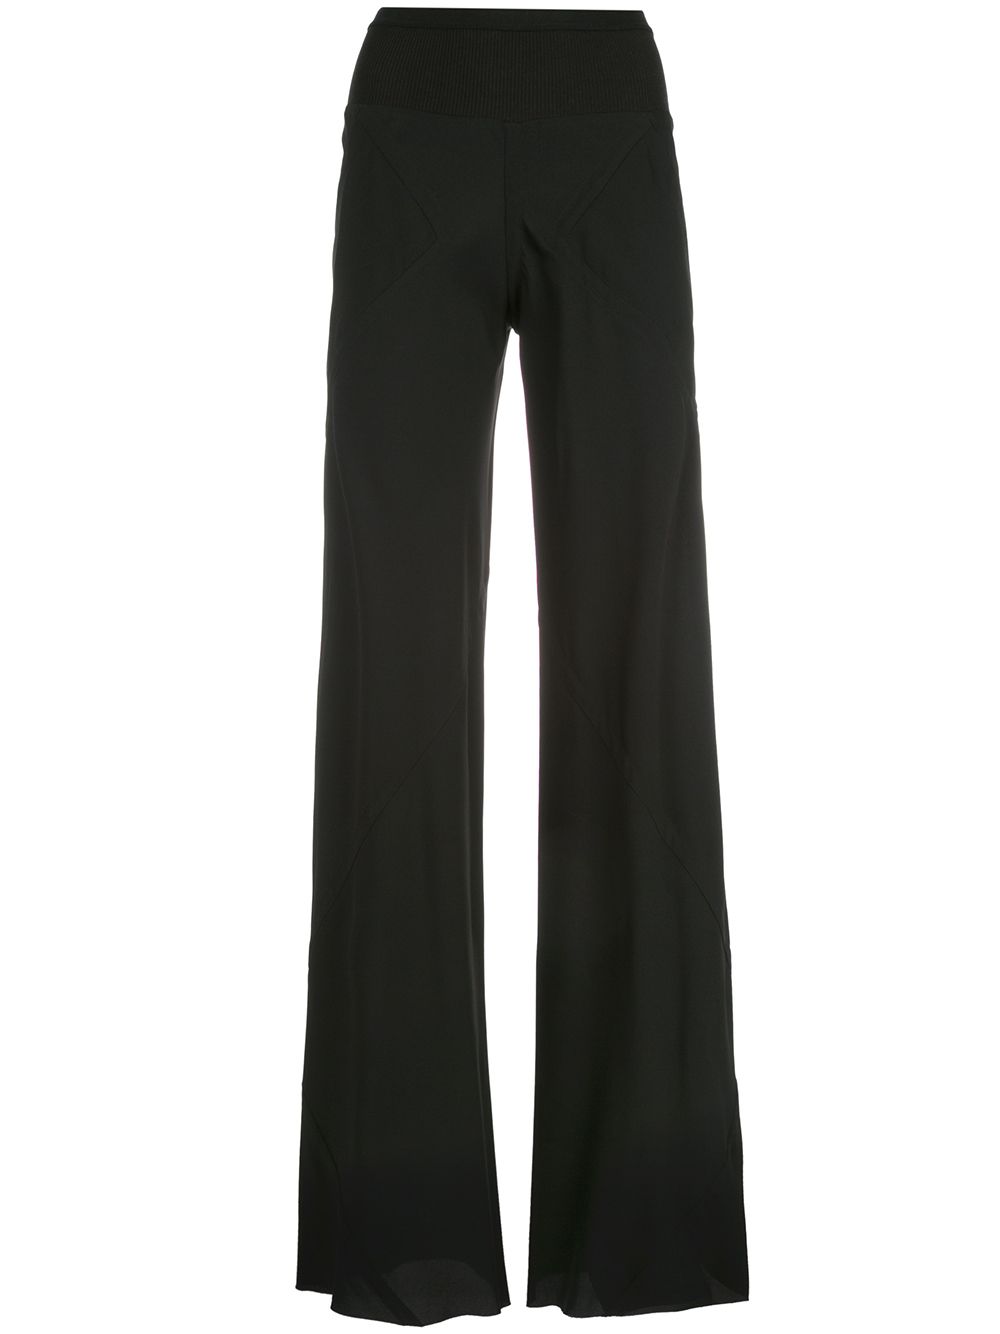 RICK OWENS ELONGATED FLARED TROUSERS